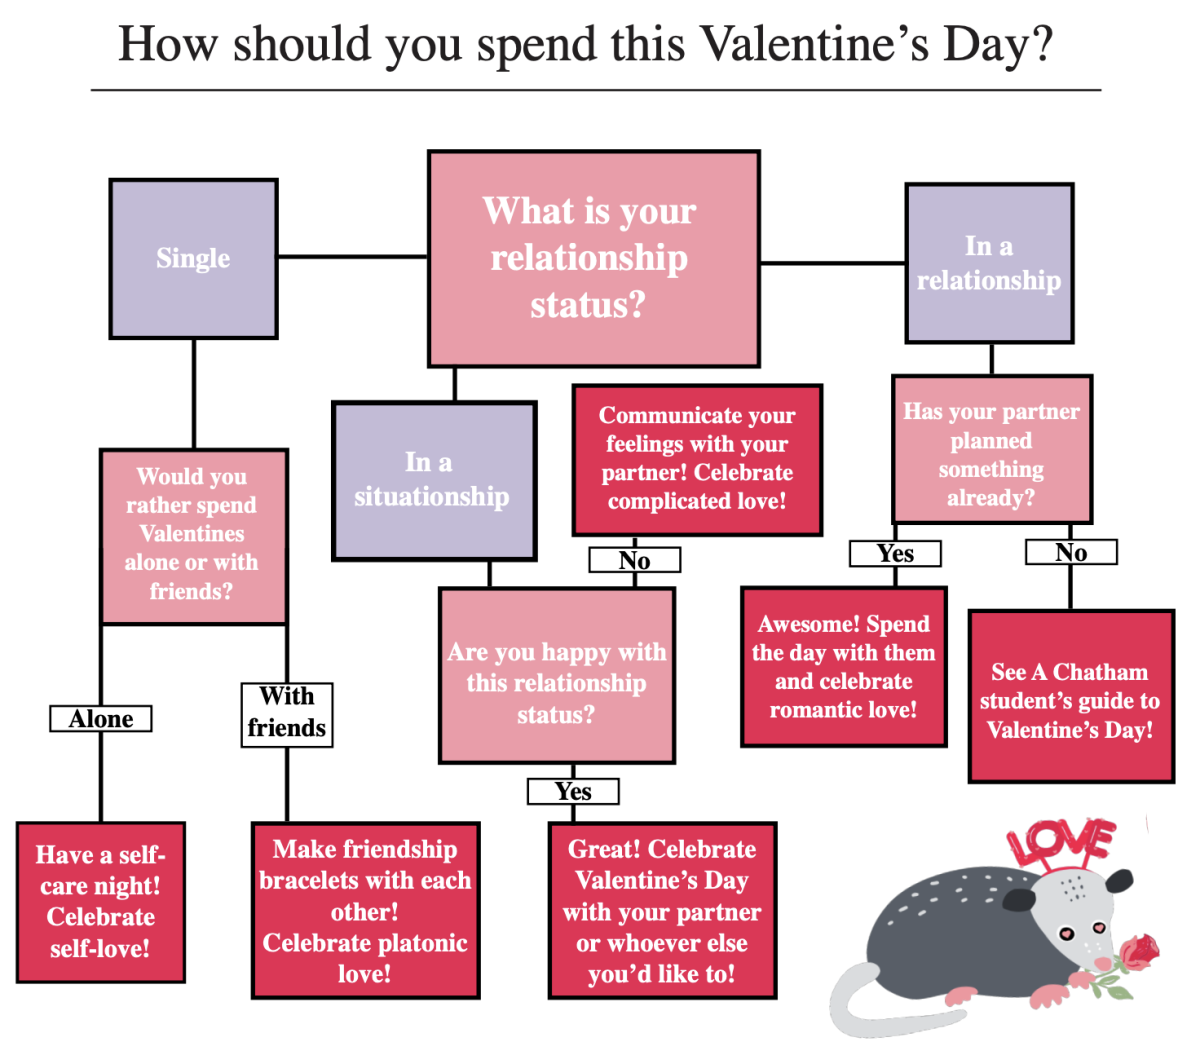 How+should+you+spend+this+Valentines+Day%3F